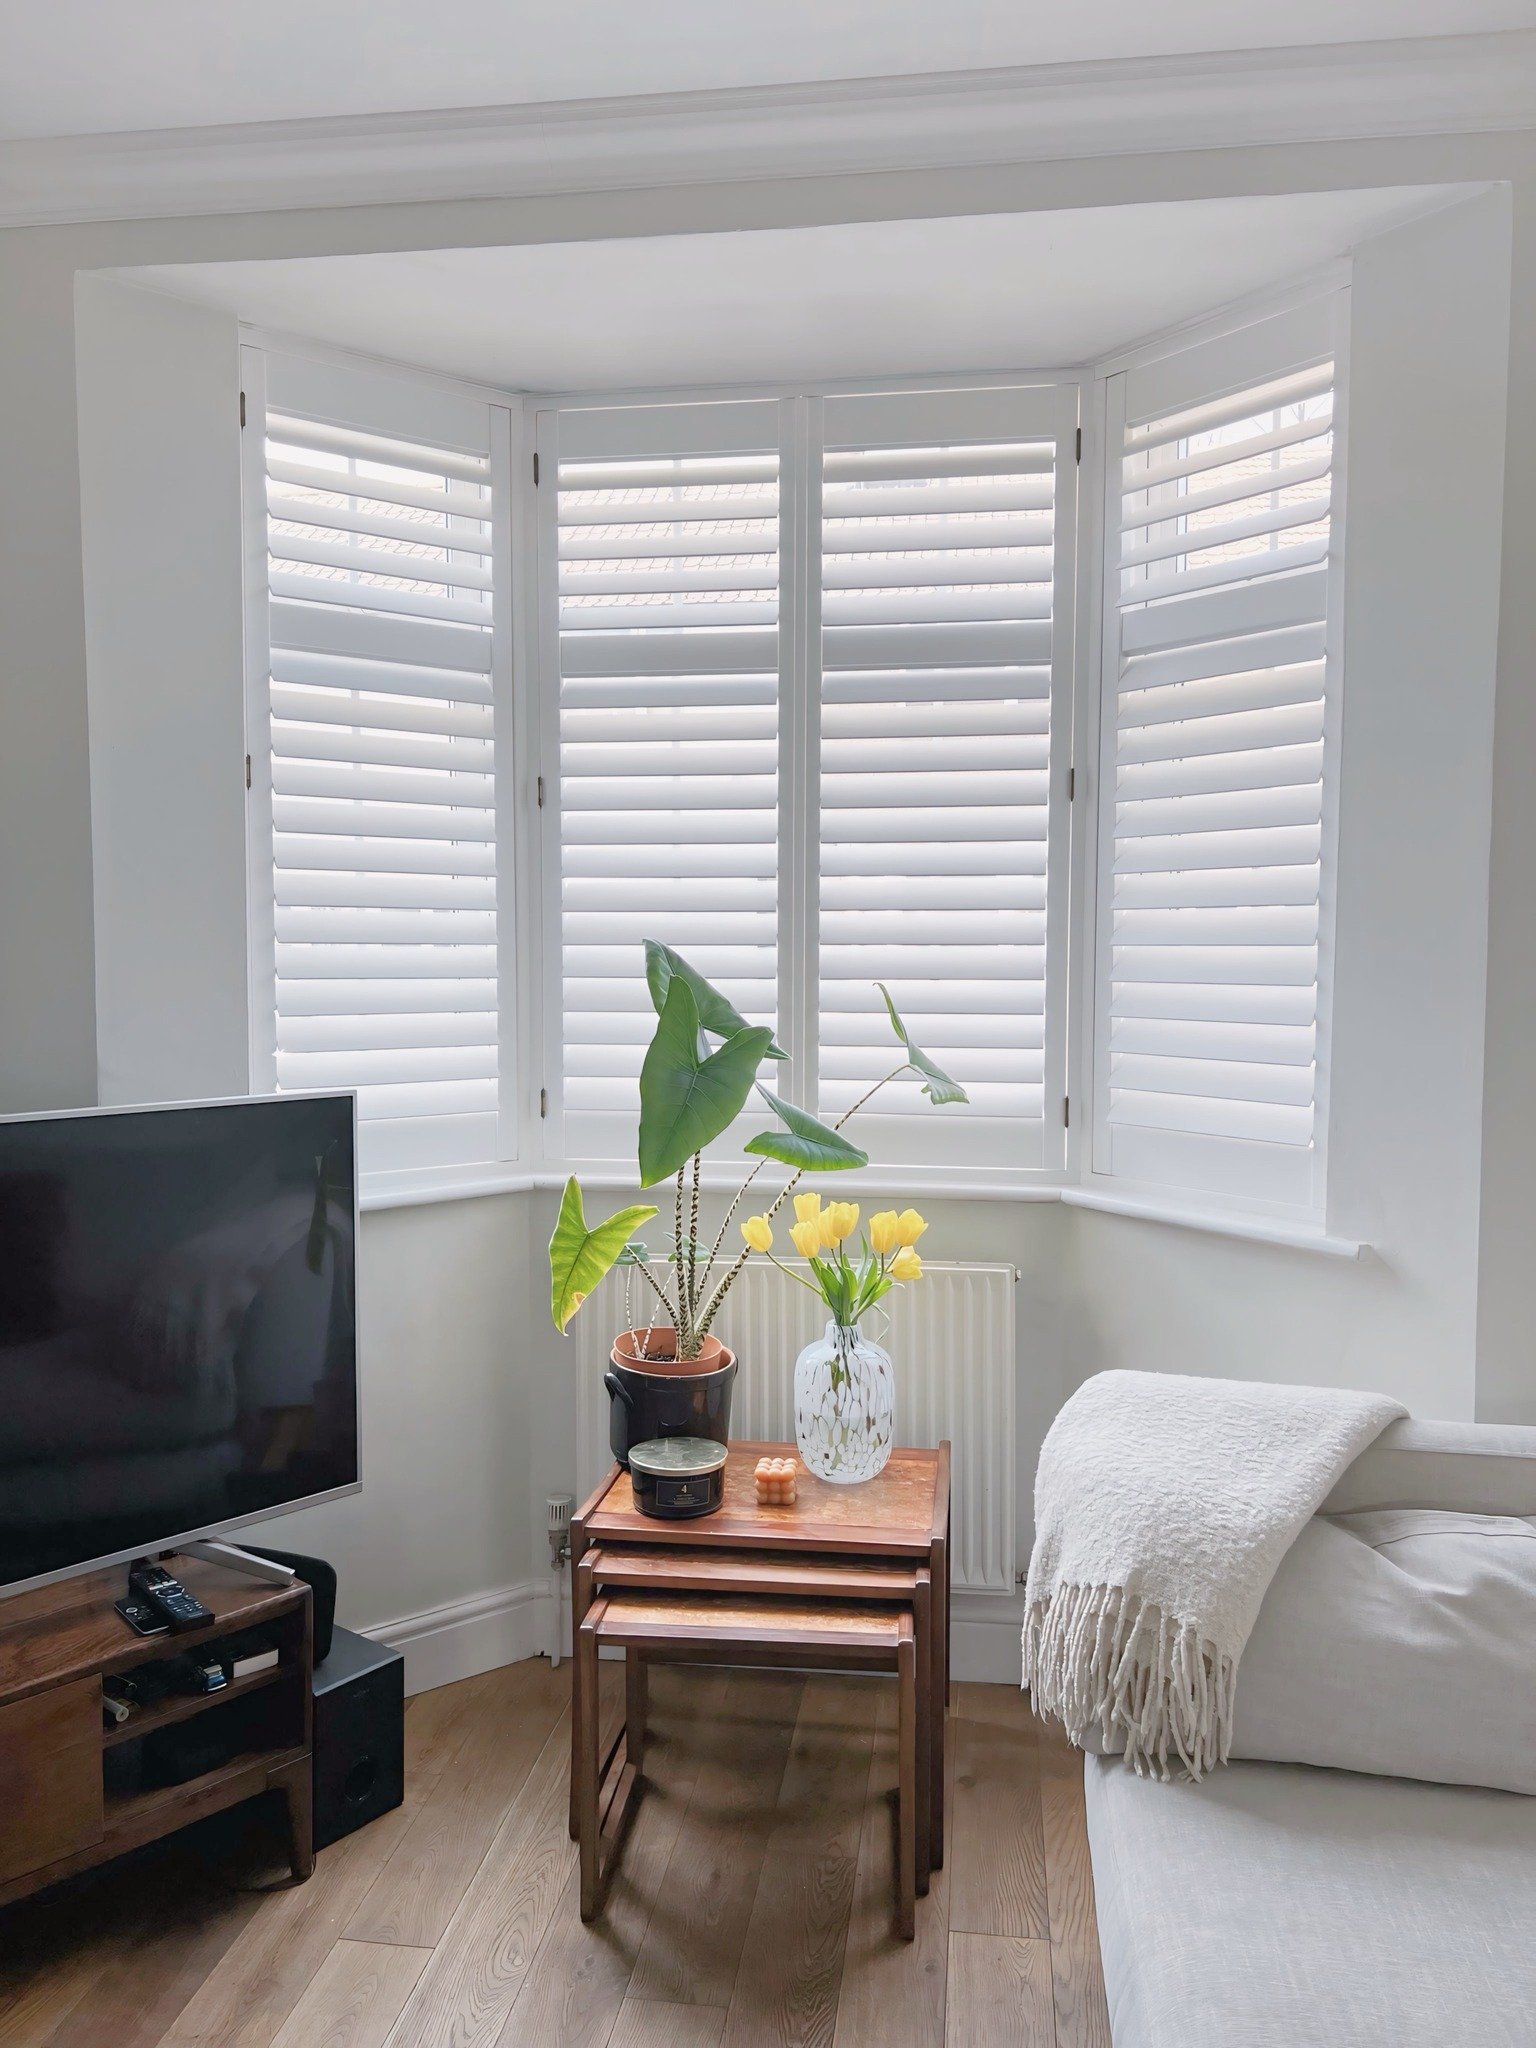 Brighten Up Your Home This Spring/Summer with Our Stunning Shutters! 🌞

A Recent Installation of our Full Height Shutters in Pure White, Featuring 76mm Medium Slats and a Midrail Bar Perfectly Aligned with The Window Design. Finished with Antique Br